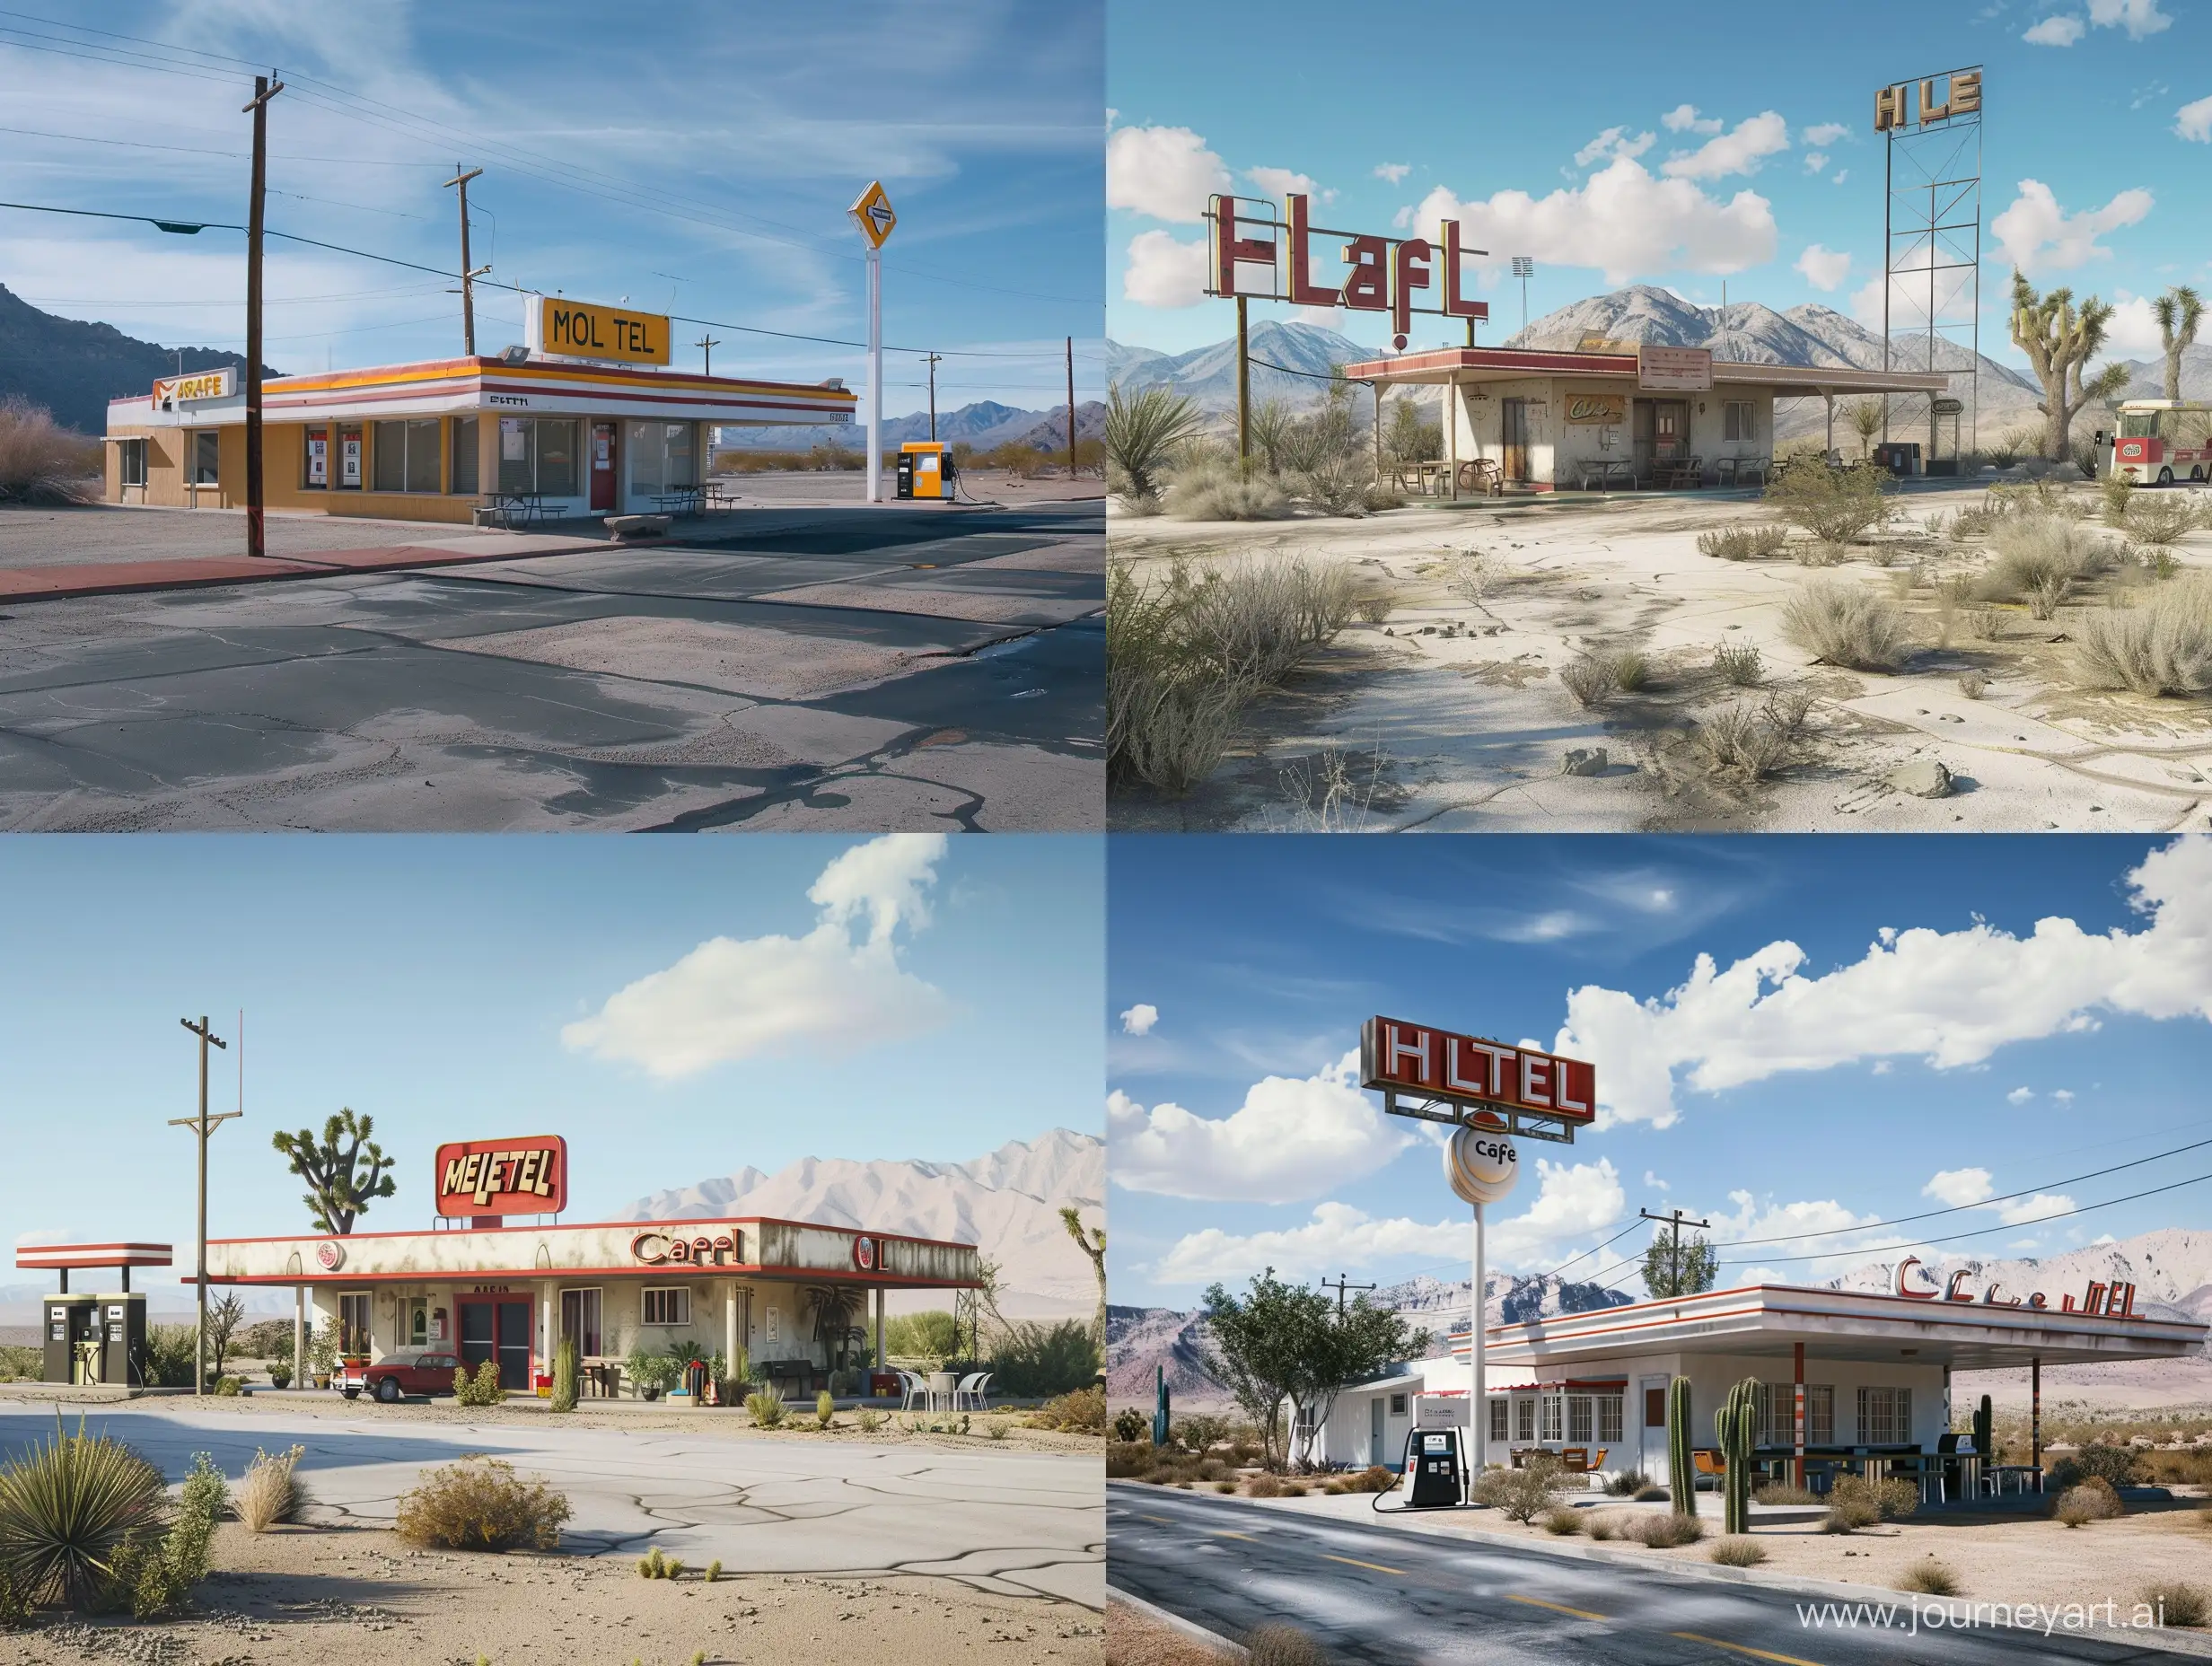 Desert-Oasis-Cozy-Motel-Caf-and-Gas-Station